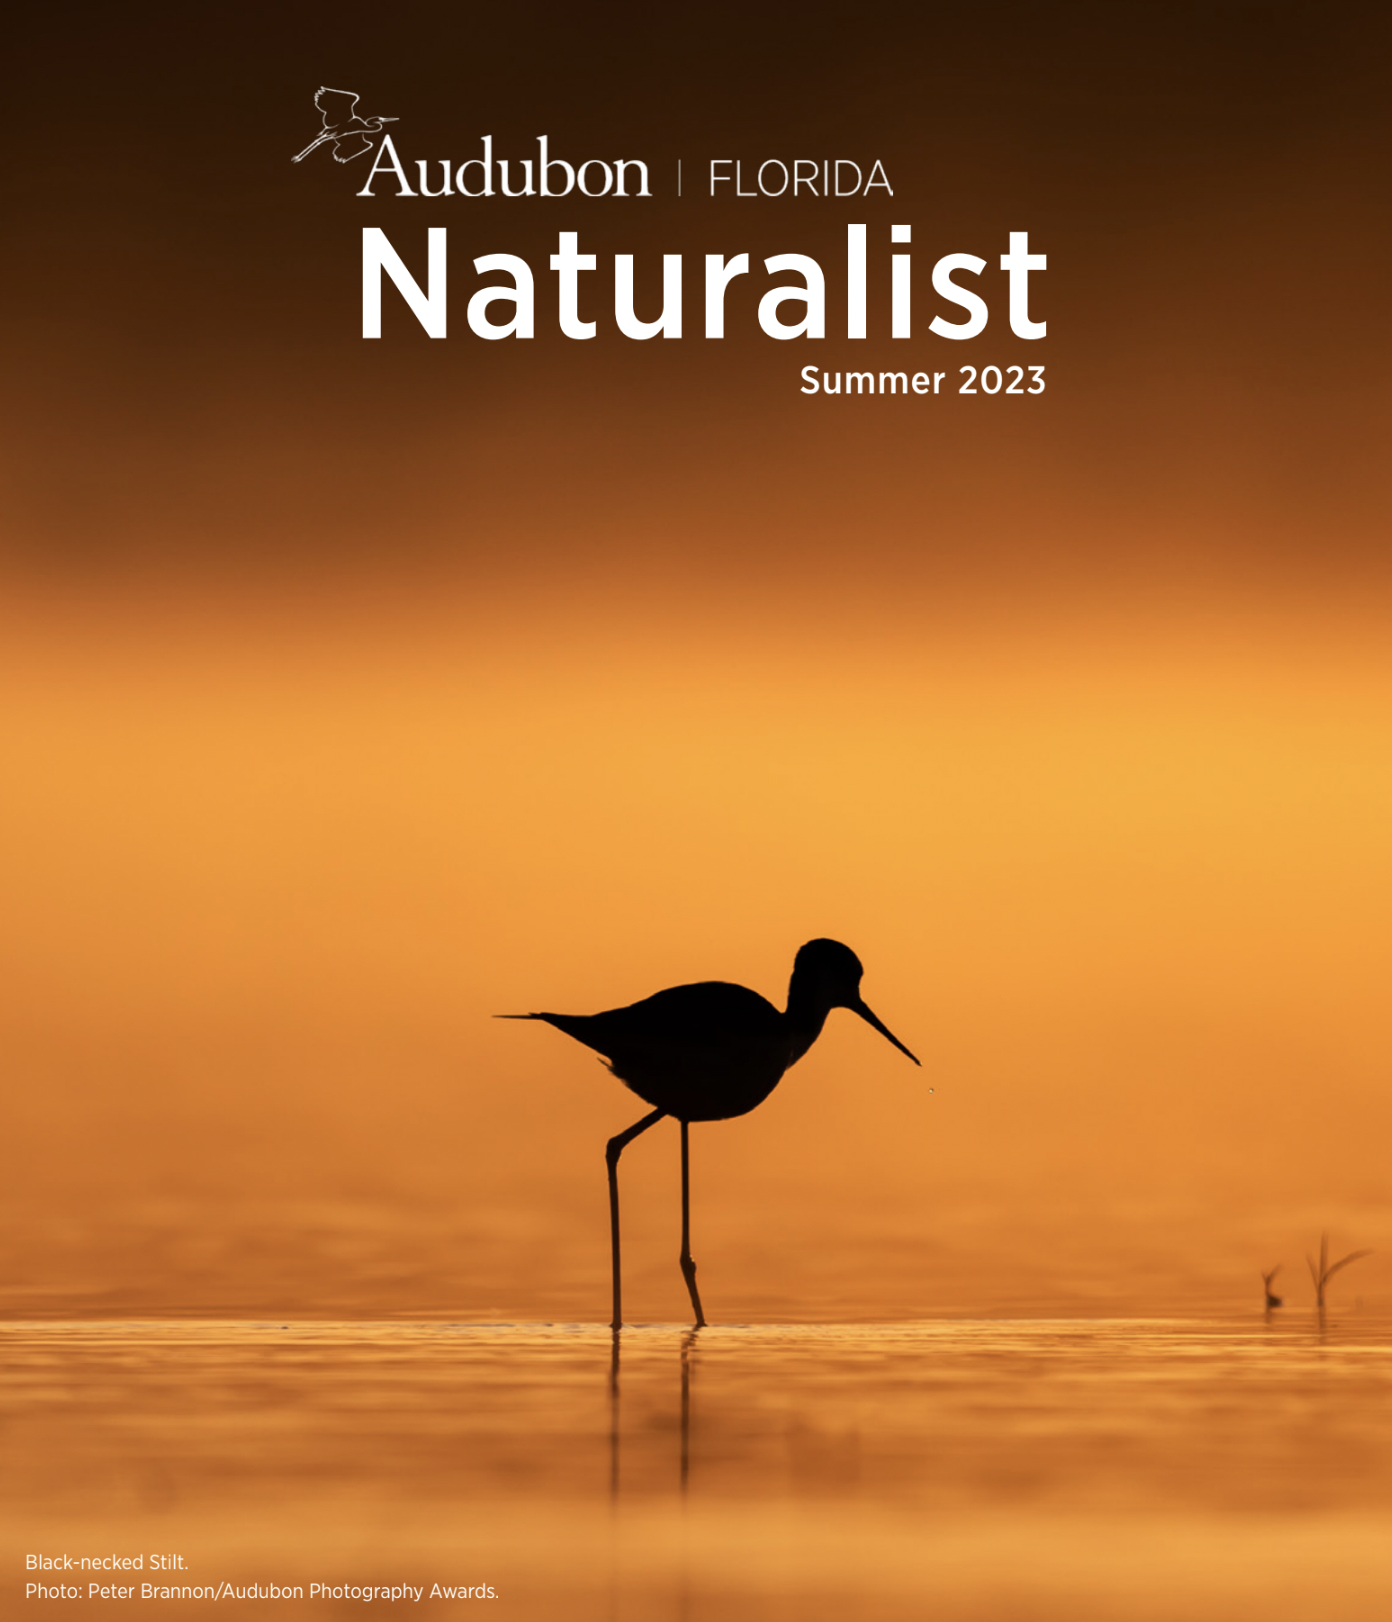 Cover of the Summer 2023 Naturalist. Silhouette of a Black-necked Stilt against an orange background.